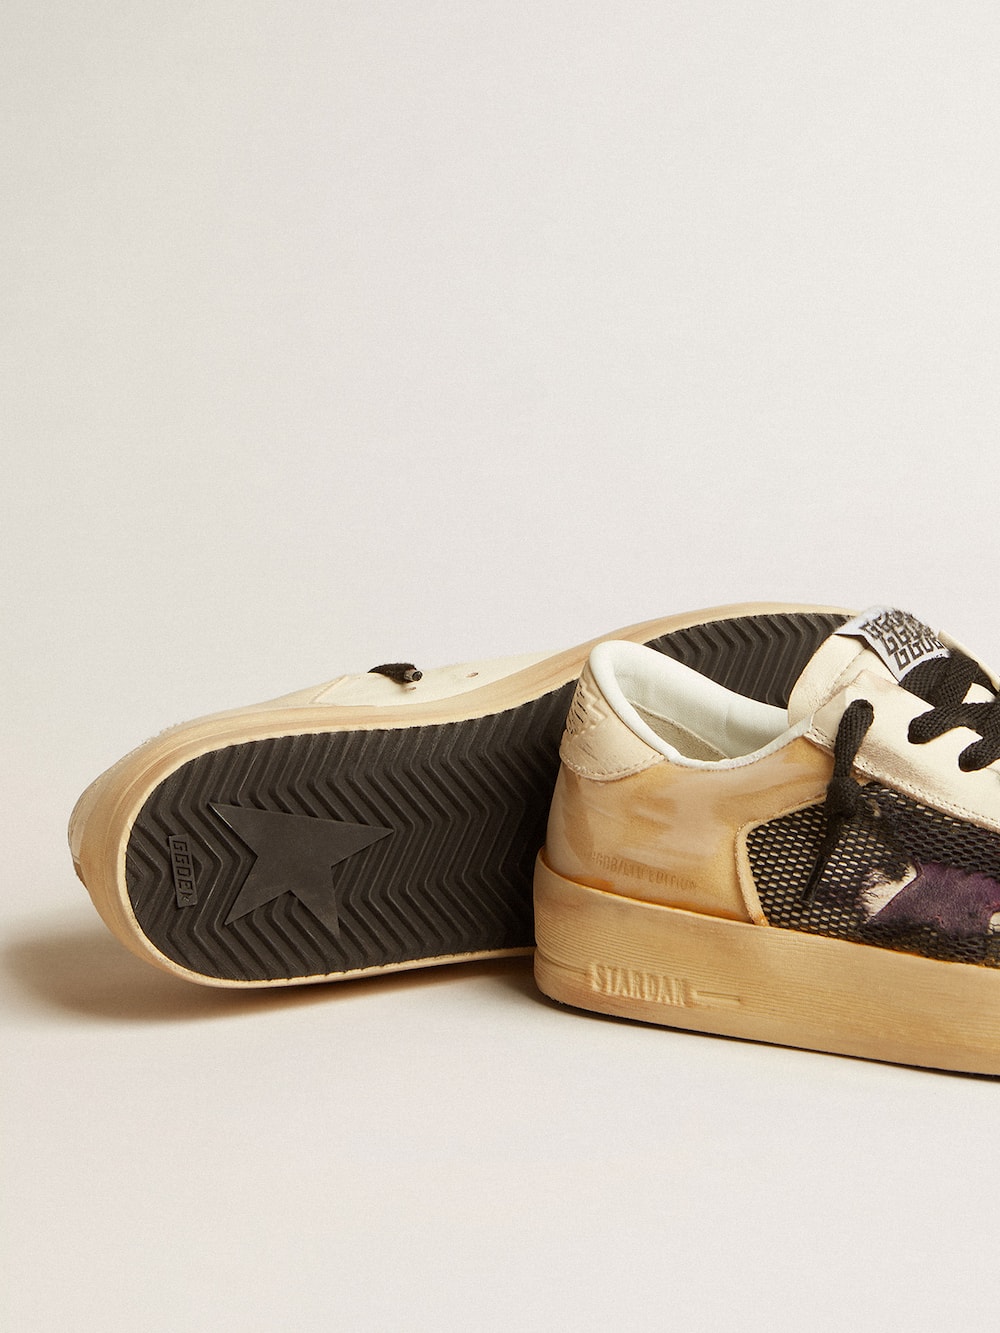 Golden Goose - Women's Stardan LAB in ecru nappa and mesh with purple leather star in 